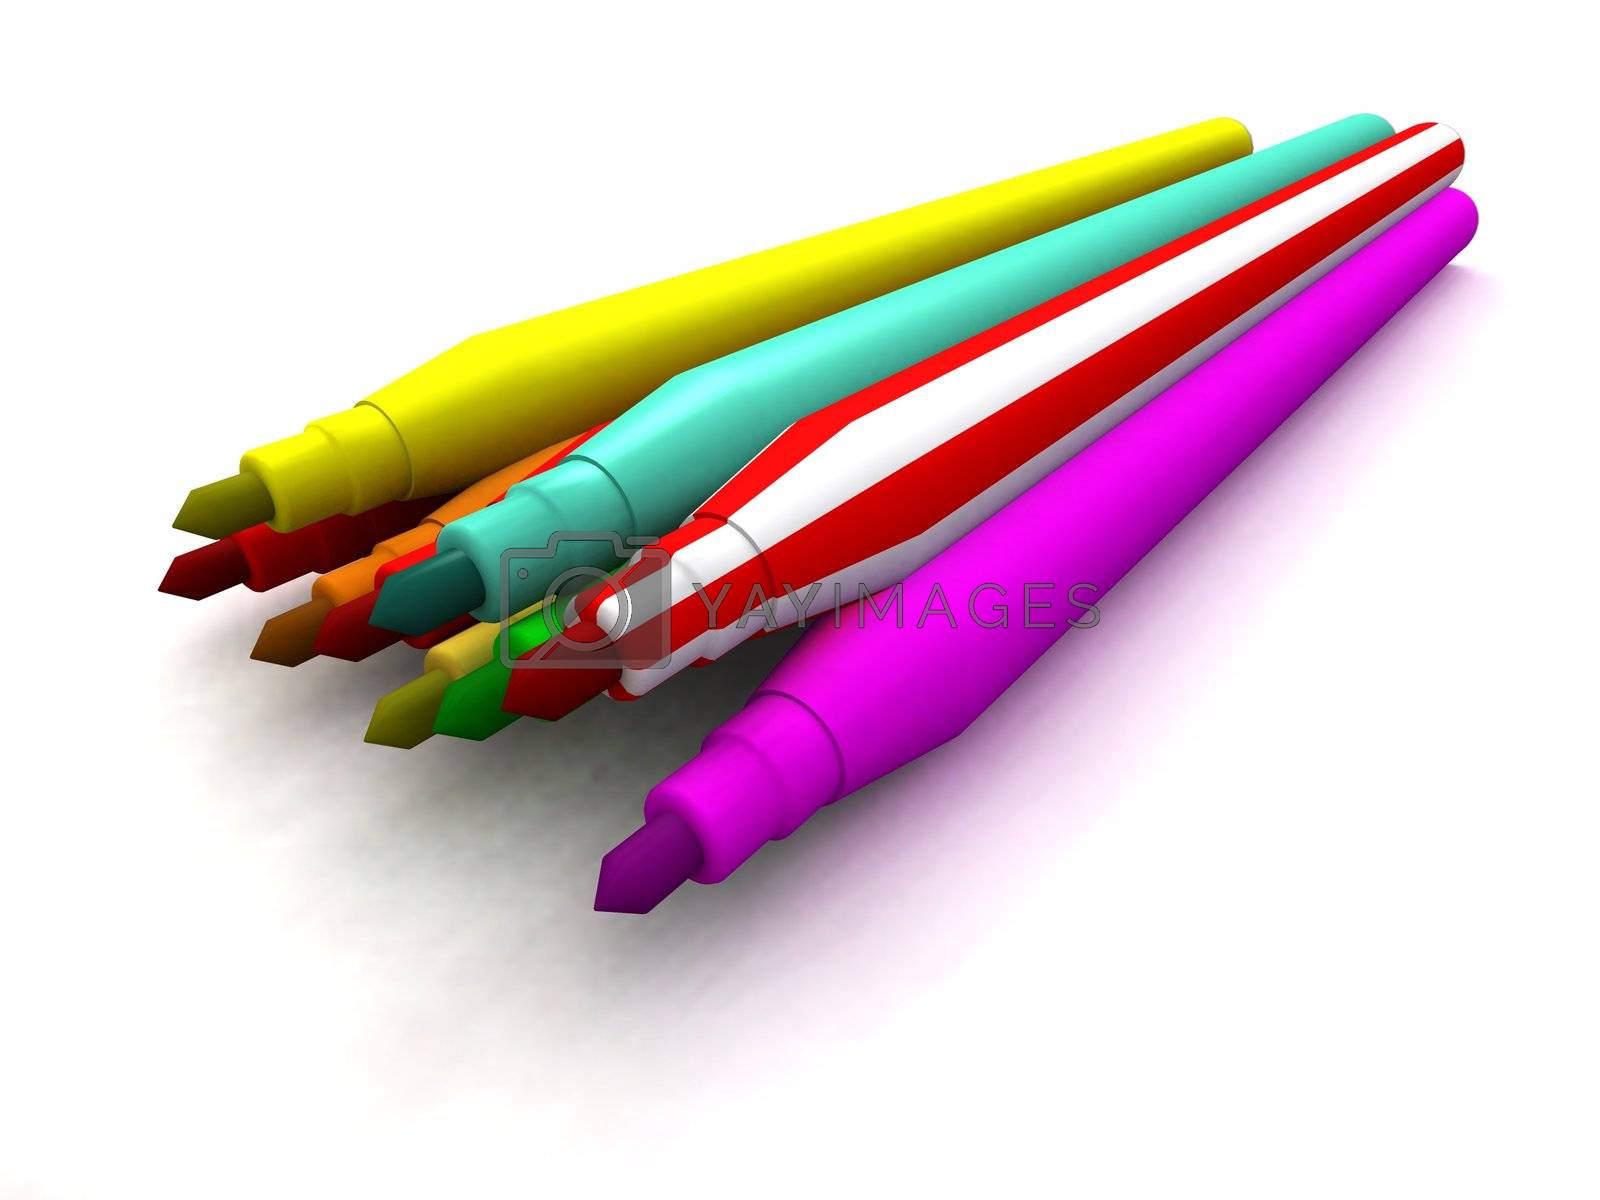 Royalty free image of colored felt-tips by jbouzou